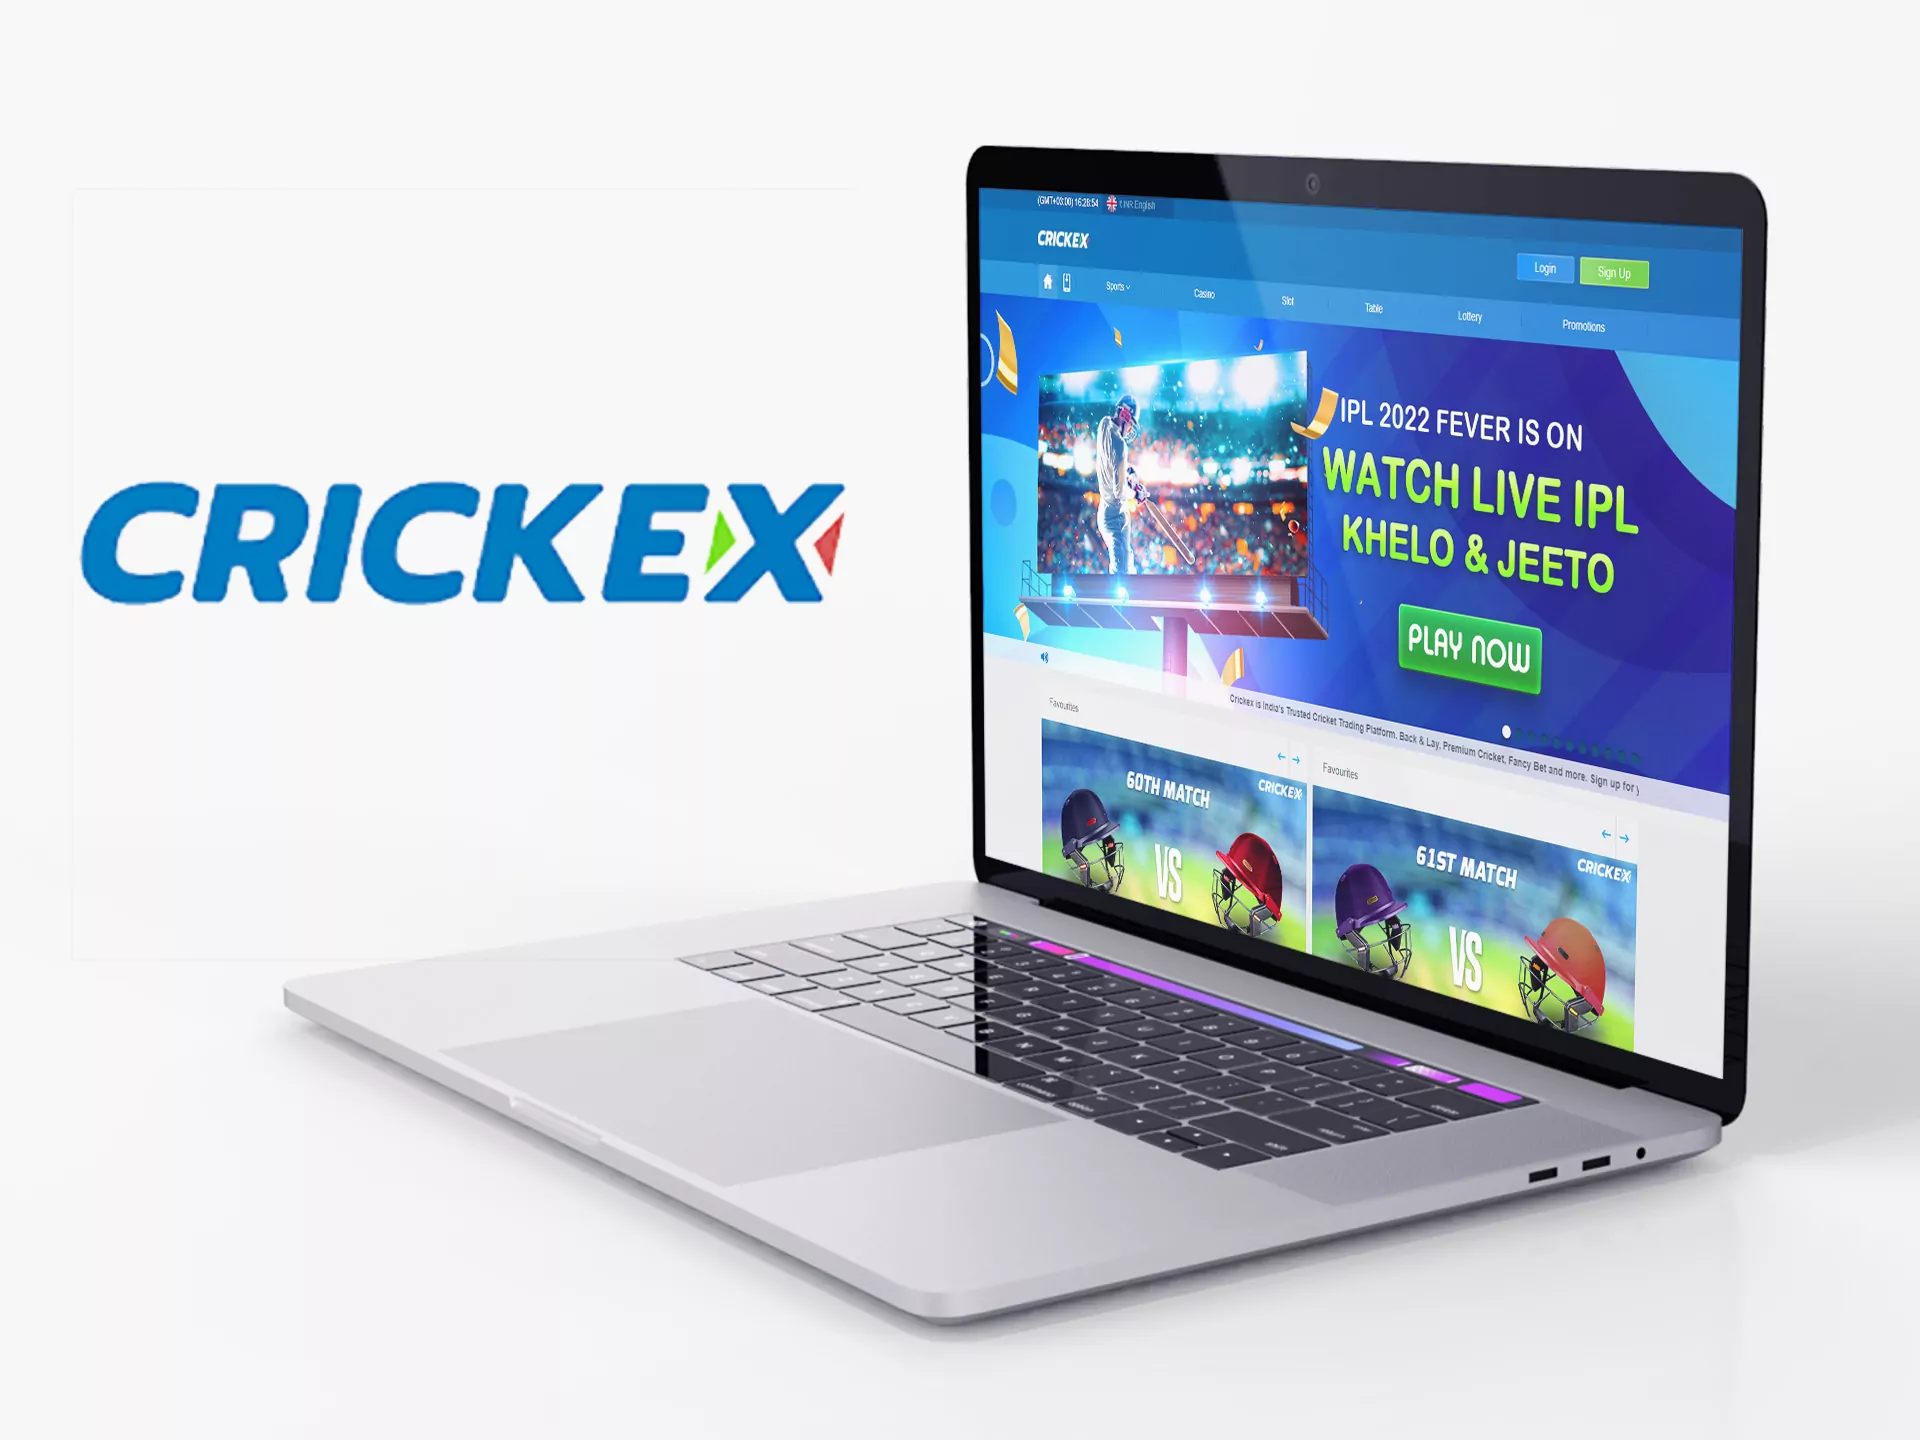 Crickex betting site focuses on the quality of events rather than their quantity in the sportsbook.